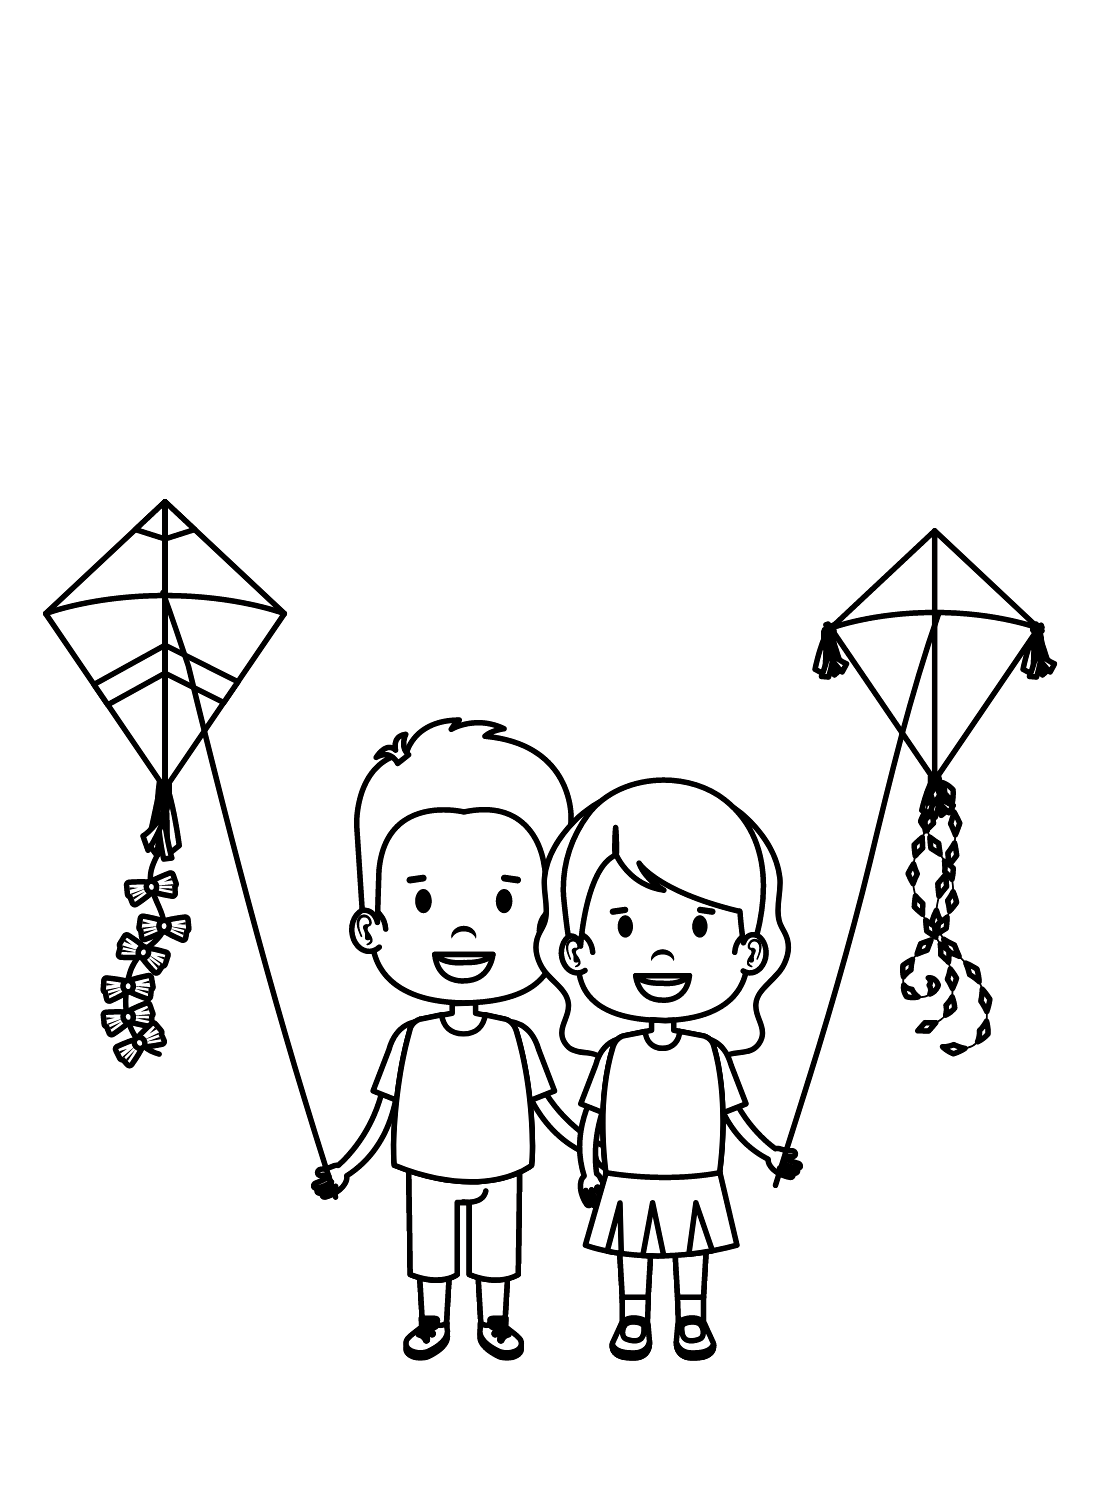 Flying kite coloring page | Download Free Flying kite coloring page for kids  | Best Coloring Pages